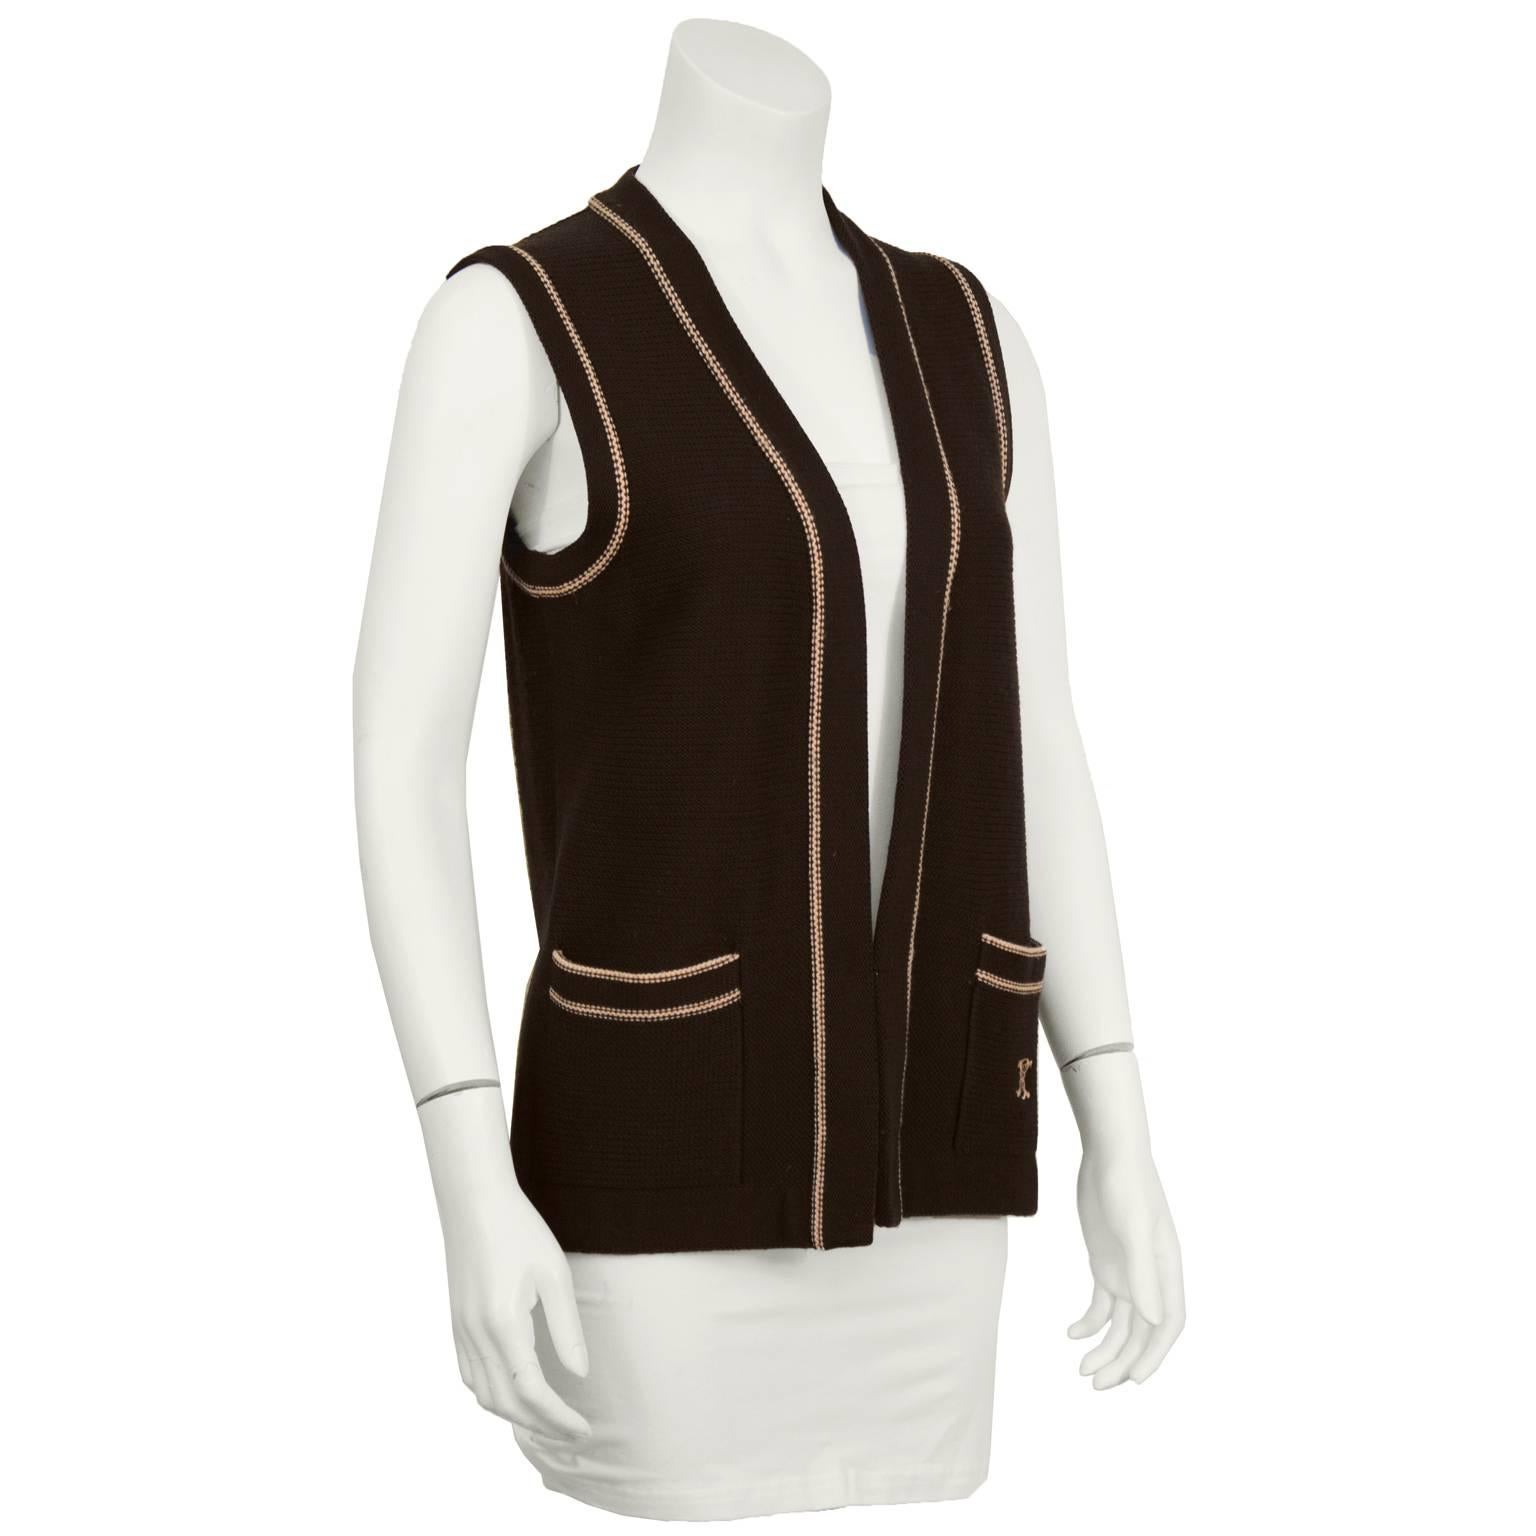 1970's Celine brown wool knit vest with two front pockets featuring knit peach piping detail and embroidered Celine logo on the left pocket. In excellent condition. Easily paired with T-shirt and jeans, this is a great accessory for any Celine